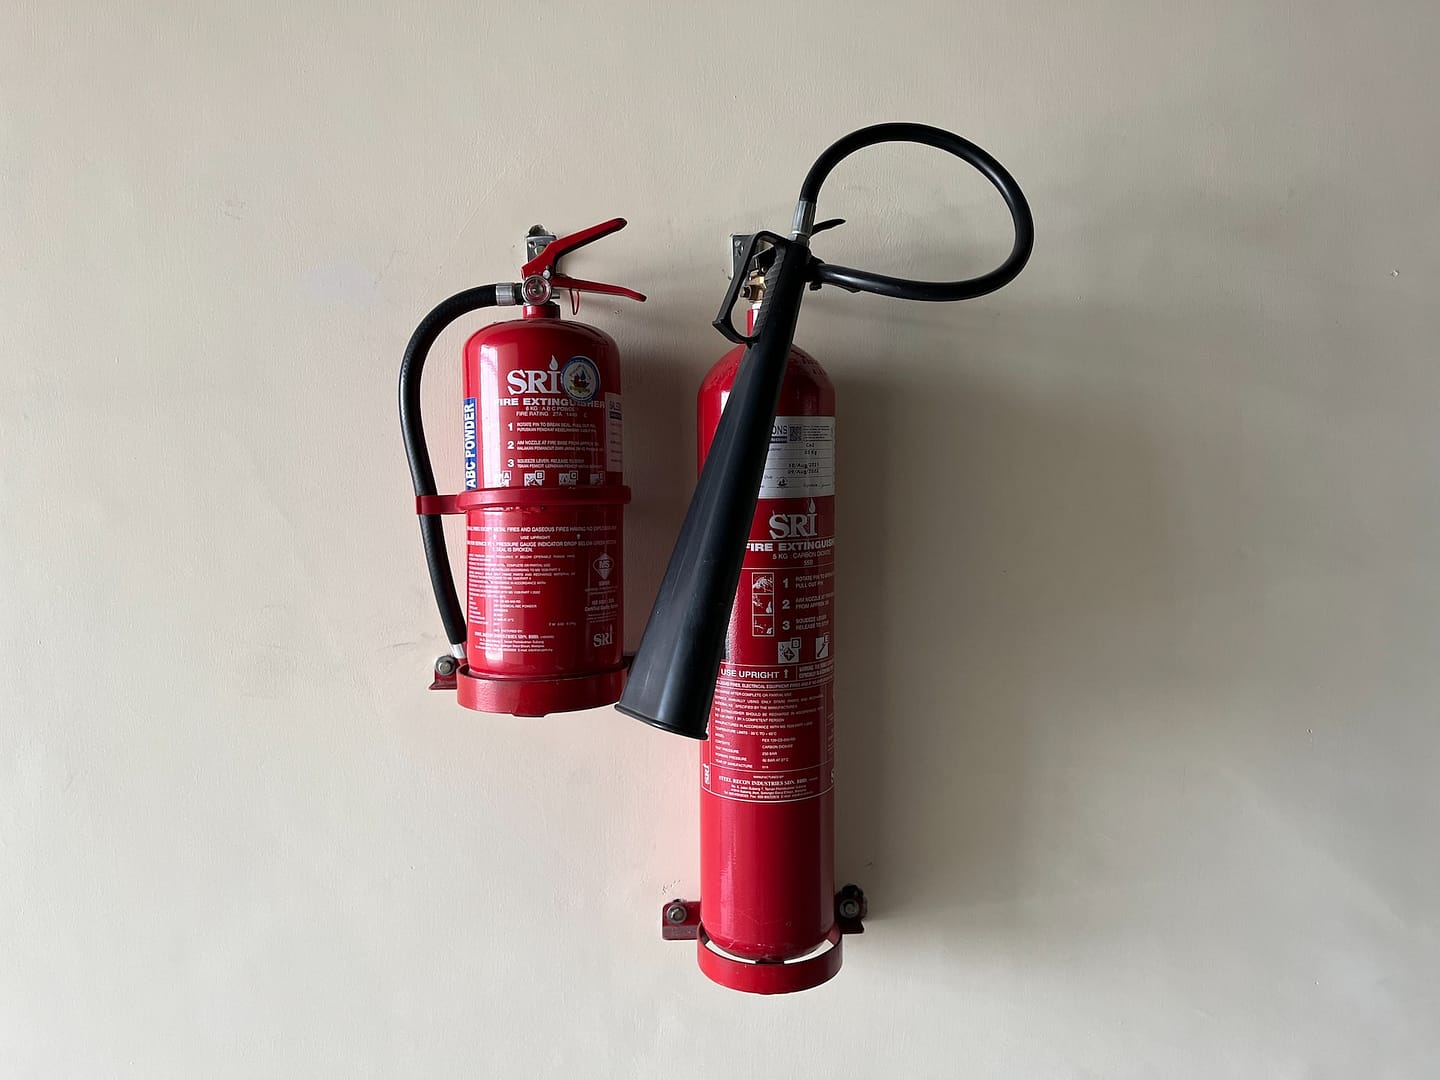 Two different fire extinguishers on a wall